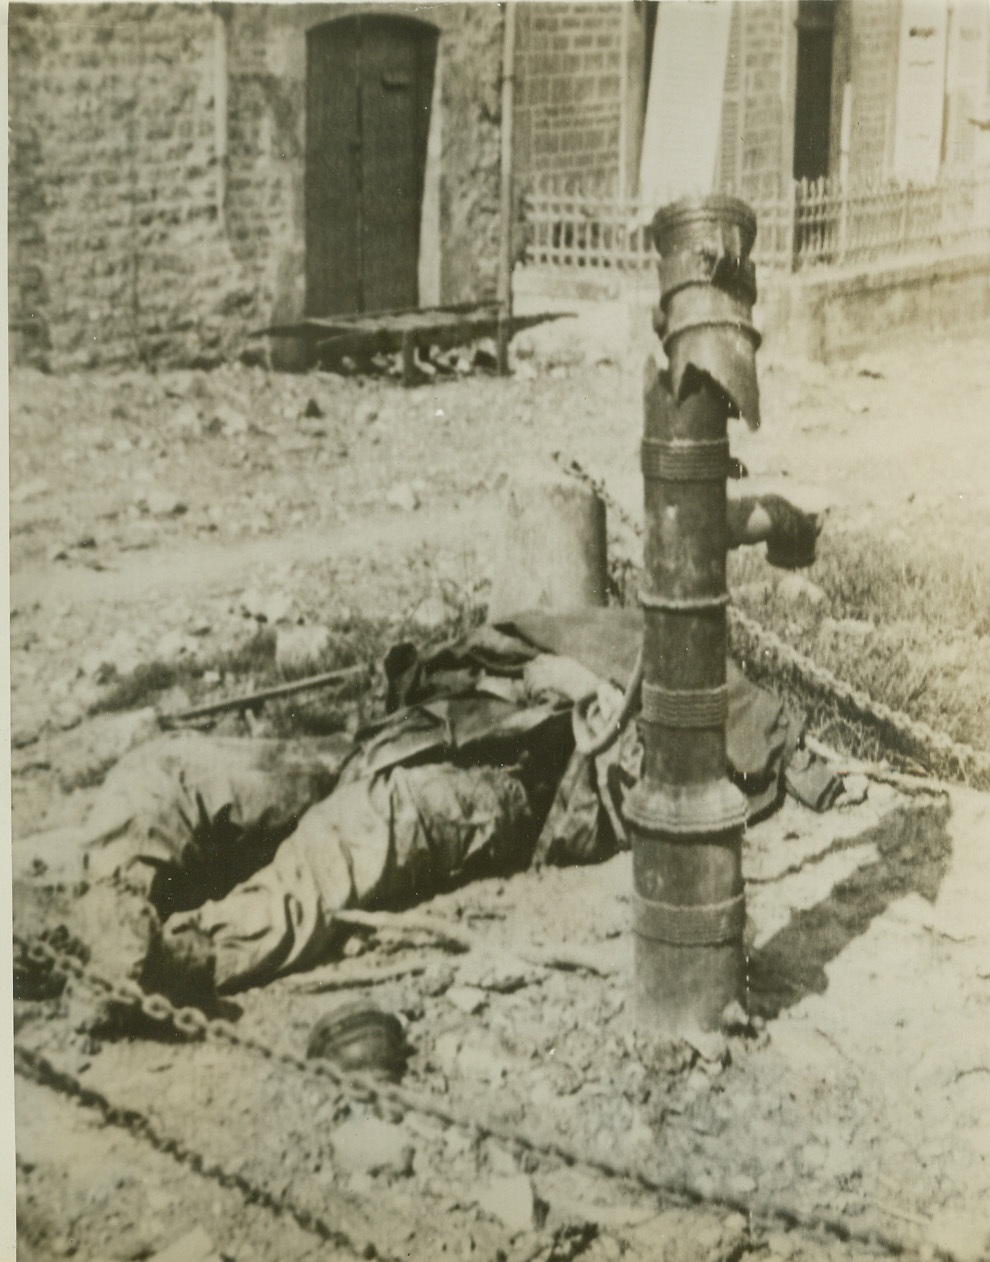 Victim of Nazi Trick, 6/18/1944. France—Treacherous Germans planted a booby trap in the water pump of a small German village on the Cherbourg peninsula—a trick that spelled death for this unsuspecting Yank. The ill-fated American lies beside the wreckage of the pump at which he met violent death. Credit: ACME photo via Signal Corps radiotelephoto;